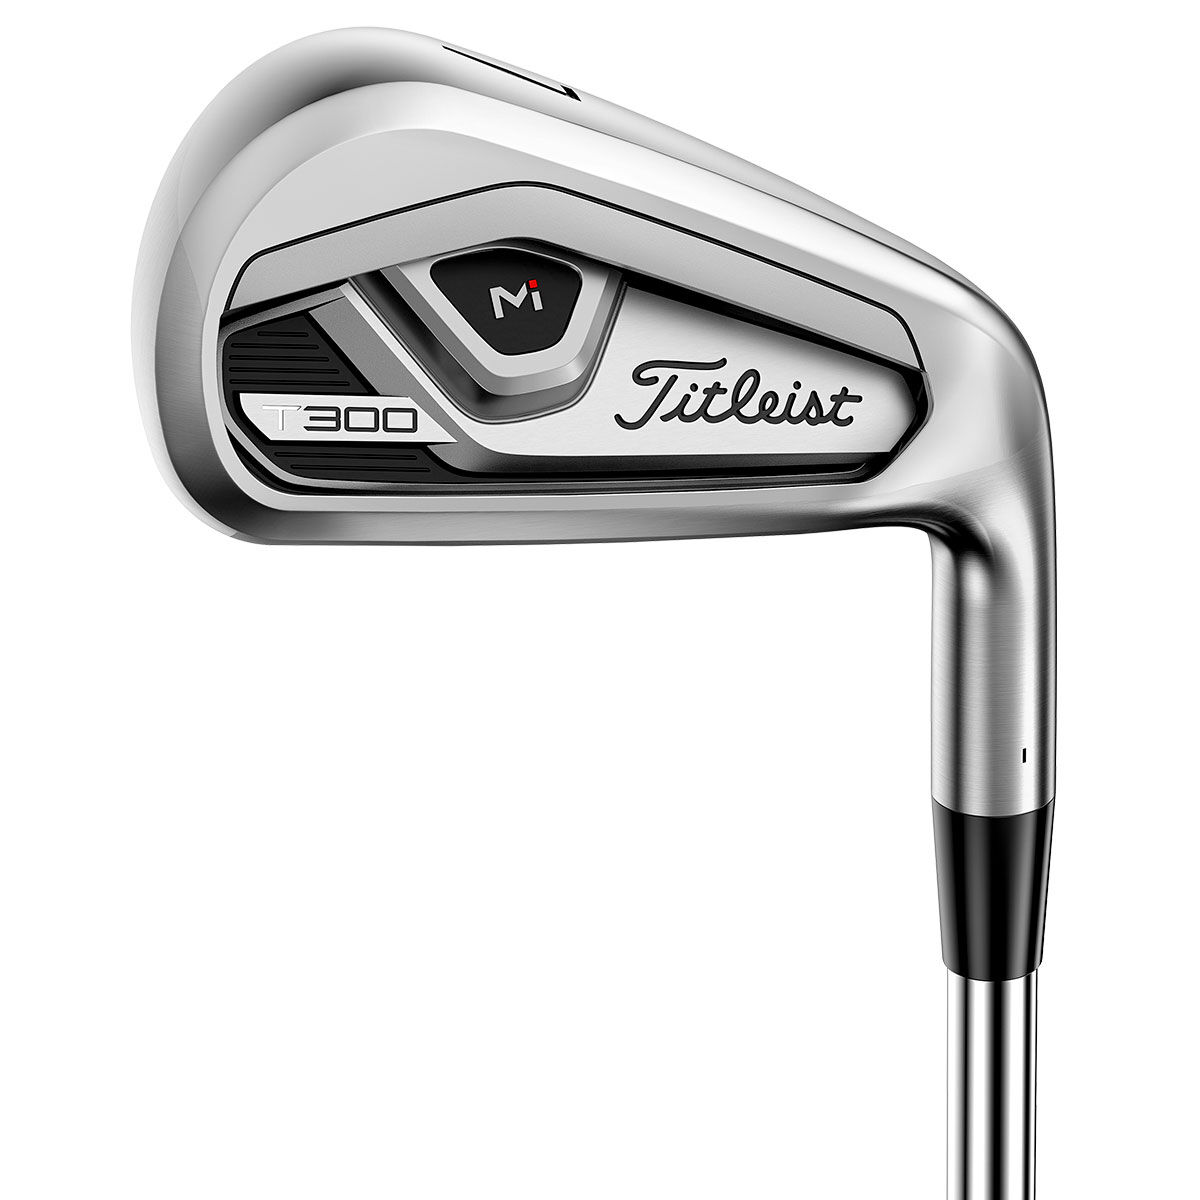 Titleist Silver and Black Printed T300 Graphite Golf Irons 2021, Womens, 5-Gw (7 Irons), Right Hand, Graphite, Lady Flex | American Golf, Size: 2000@, 2000deg